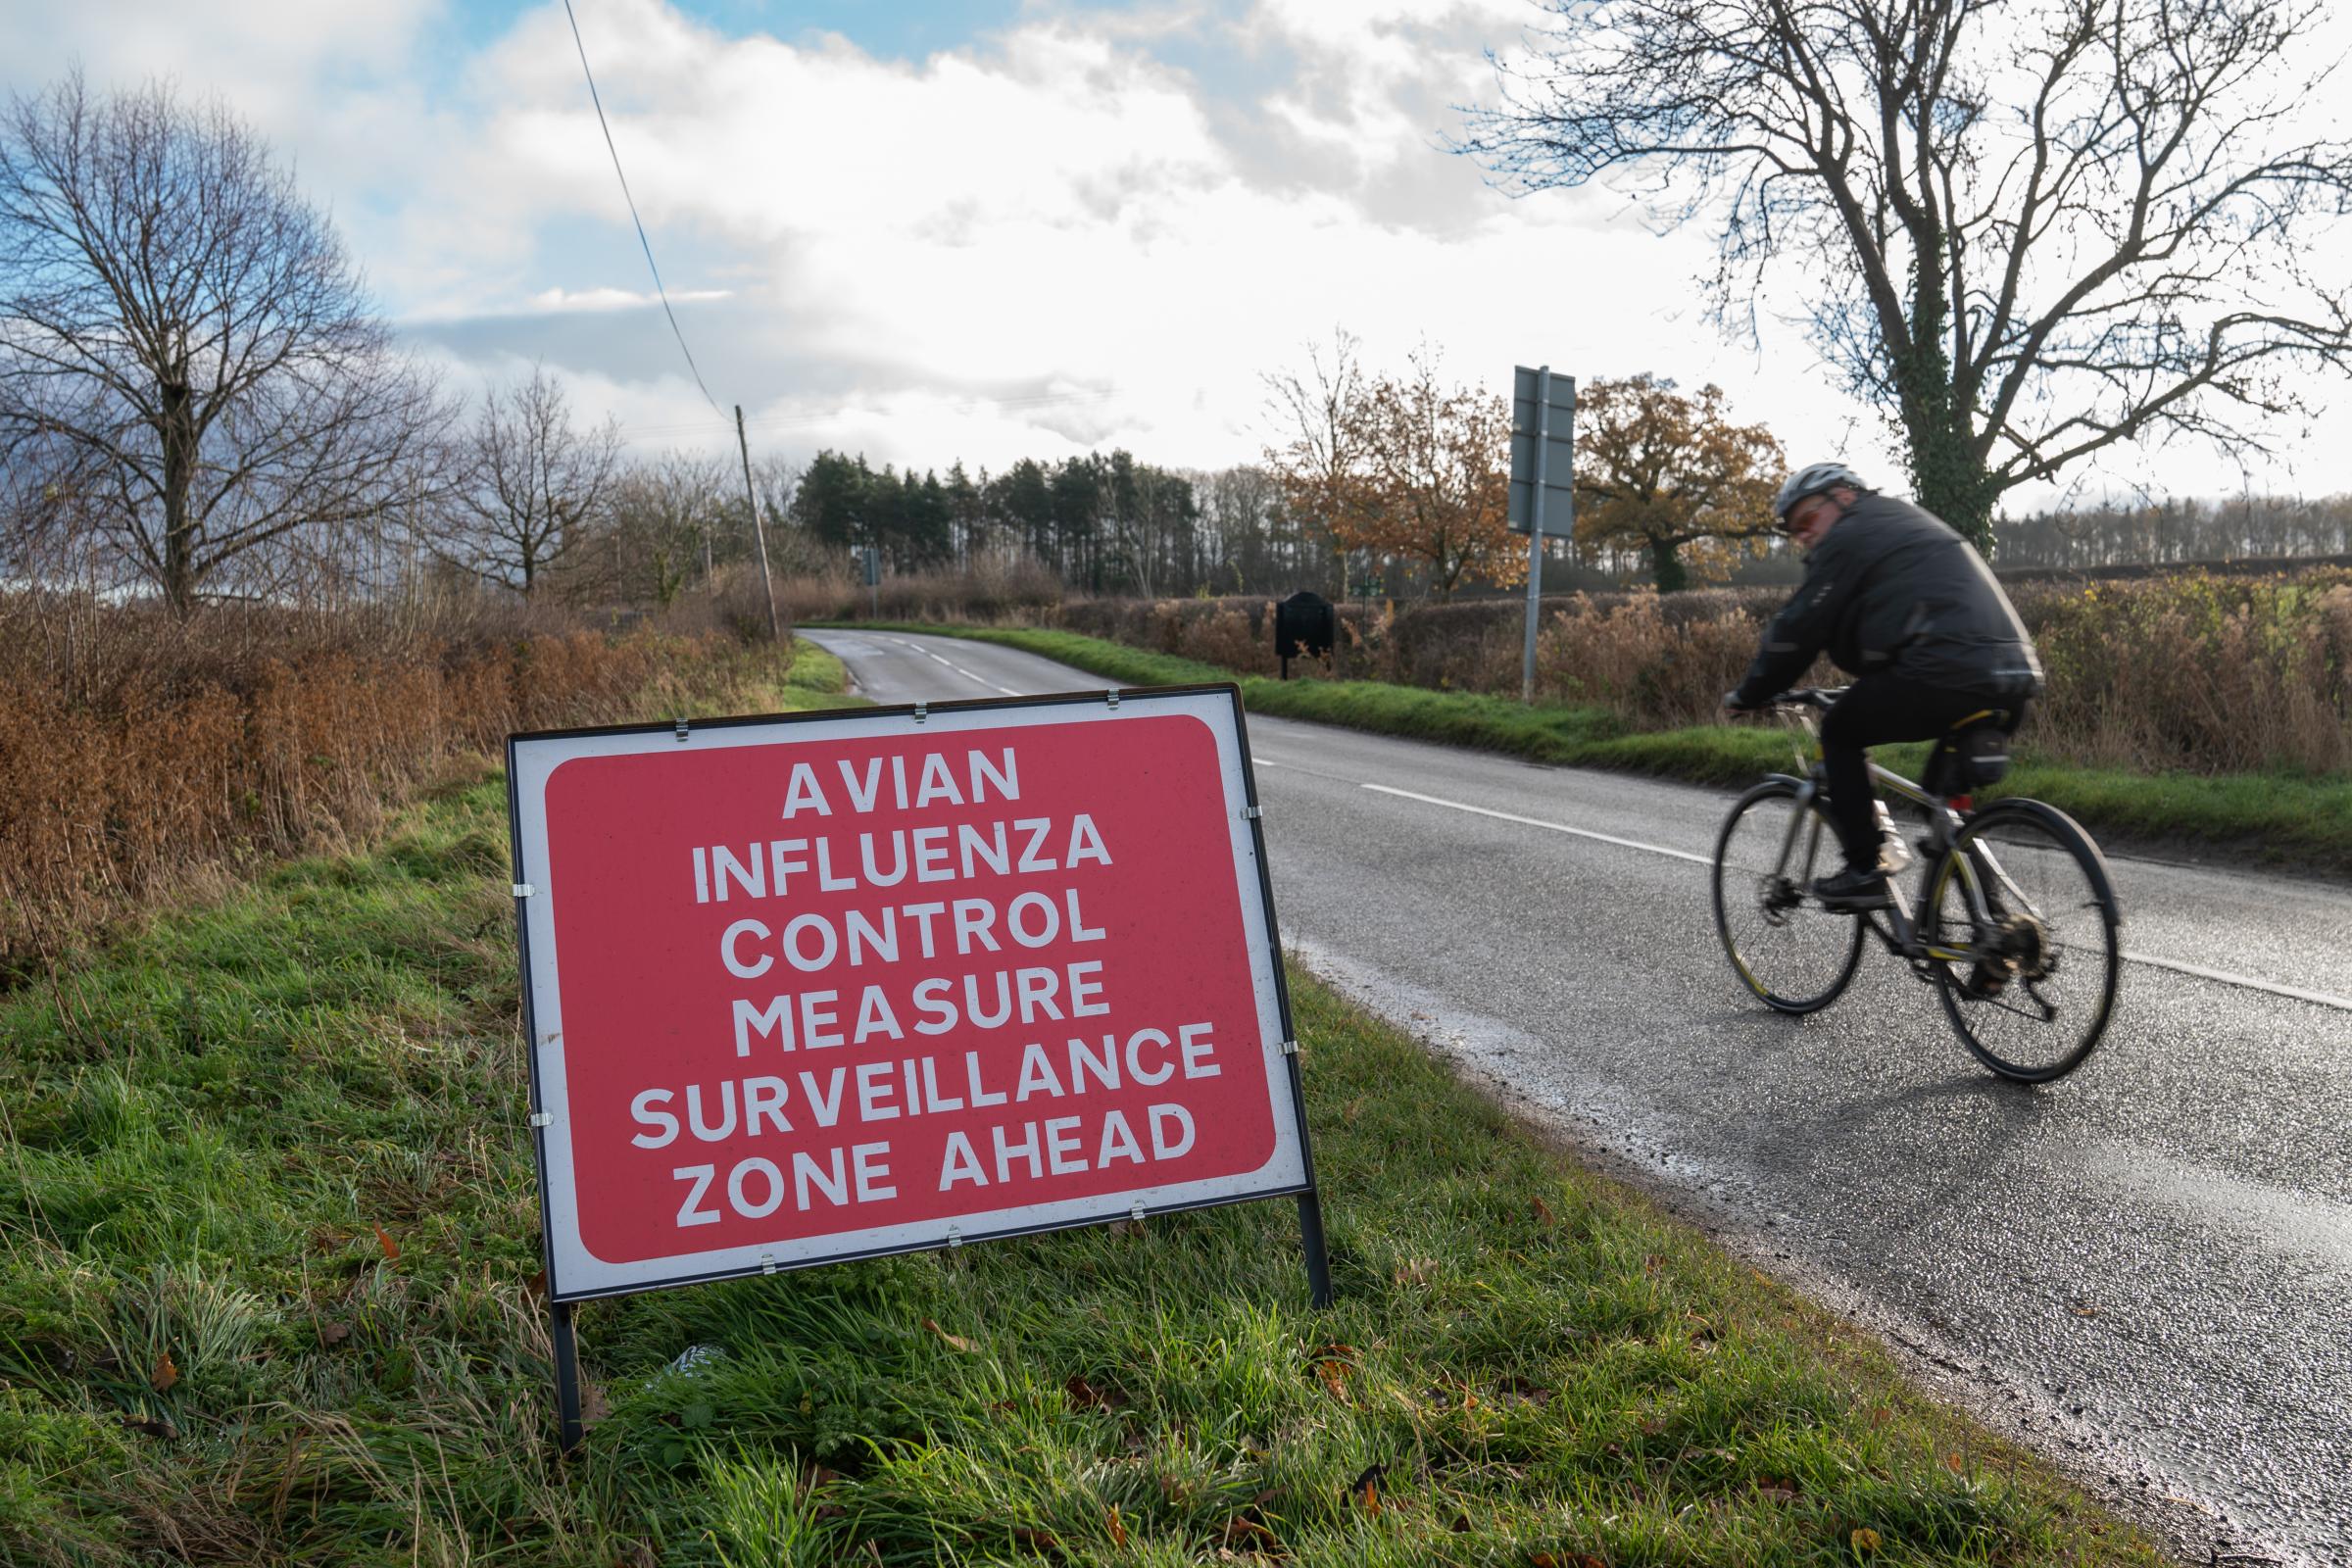 A warning sign for avian influenza (bird flu) in Barkby, Leicestershire. Picture date: Sunday December 12, 2021..